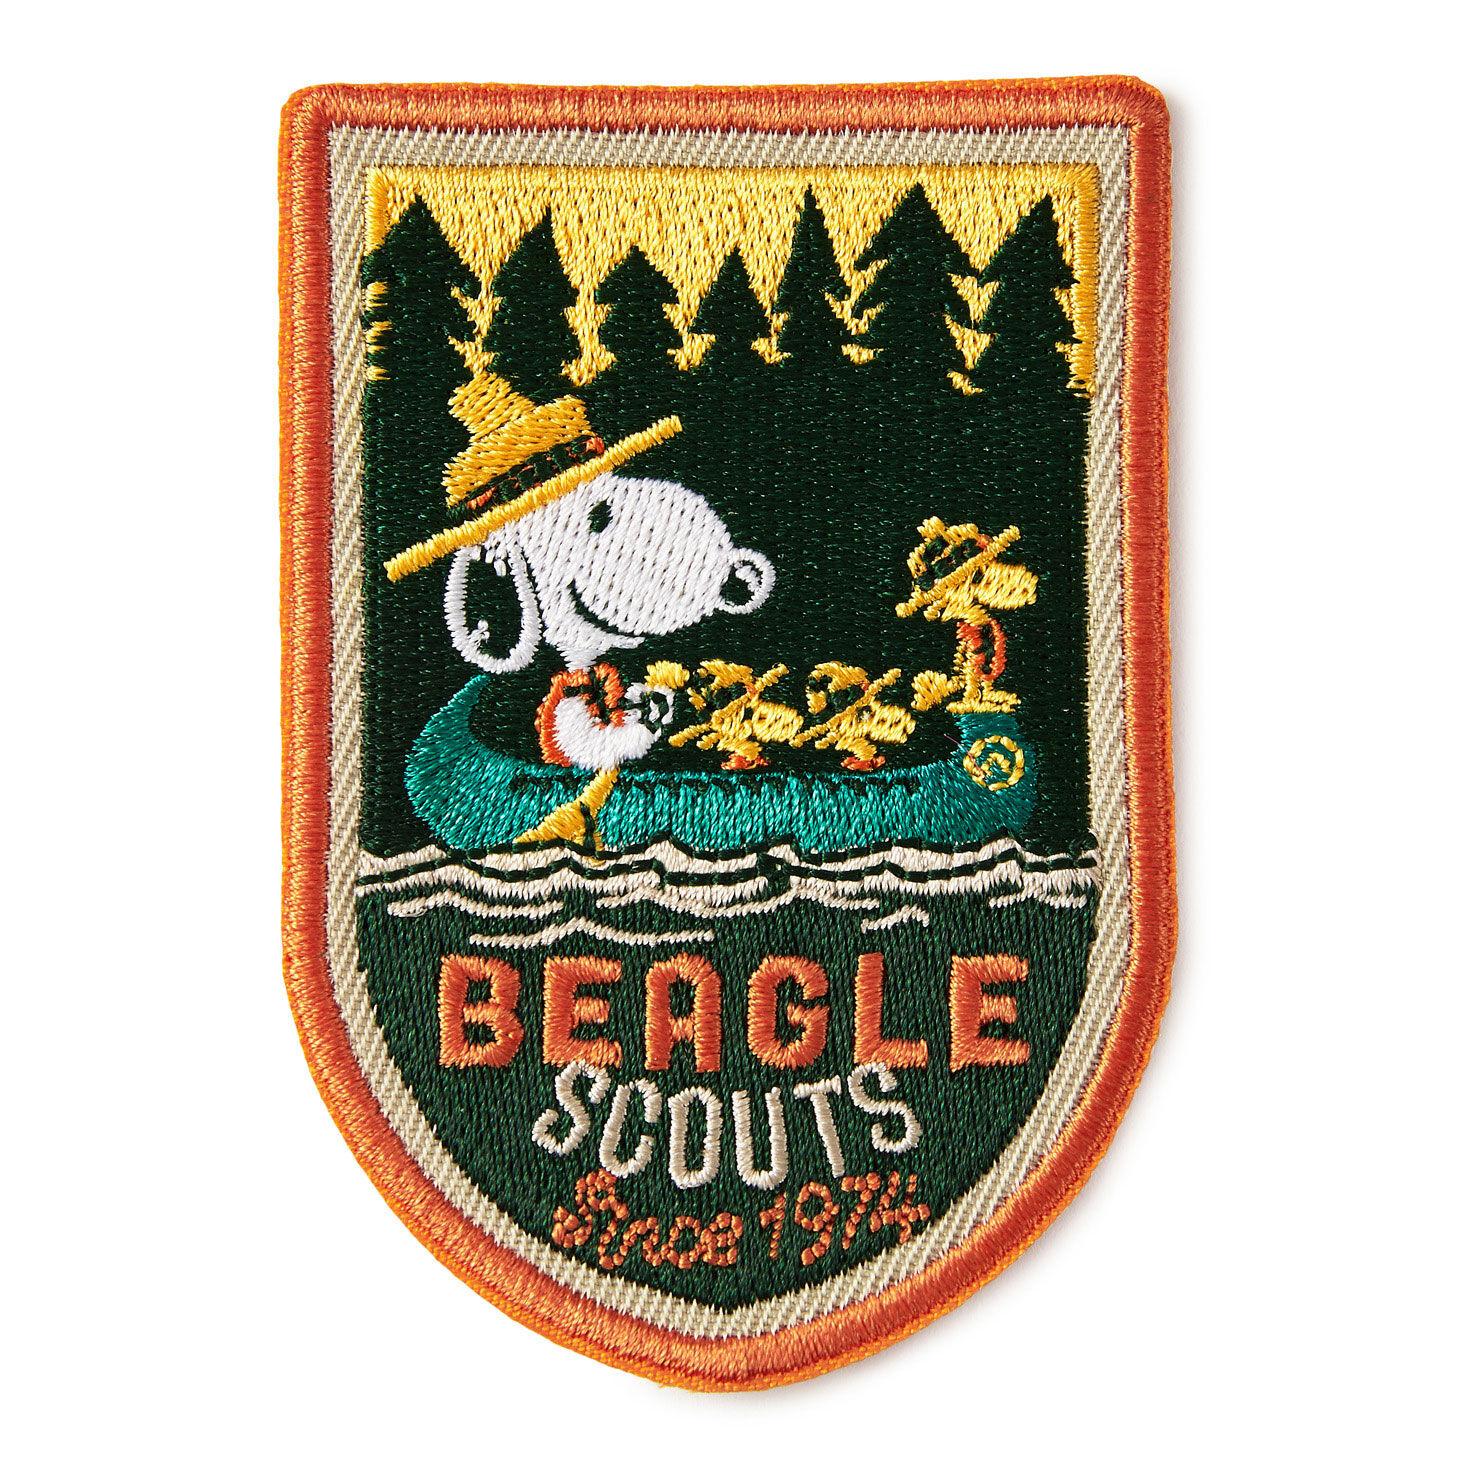 https://www.hallmark.com/dw/image/v2/AALB_PRD/on/demandware.static/-/Sites-hallmark-master/default/dwca907a98/images/finished-goods/products/1PAJ3560/Peanuts-Beagle-Scouts-Patches_1PAJ3560_01.jpg